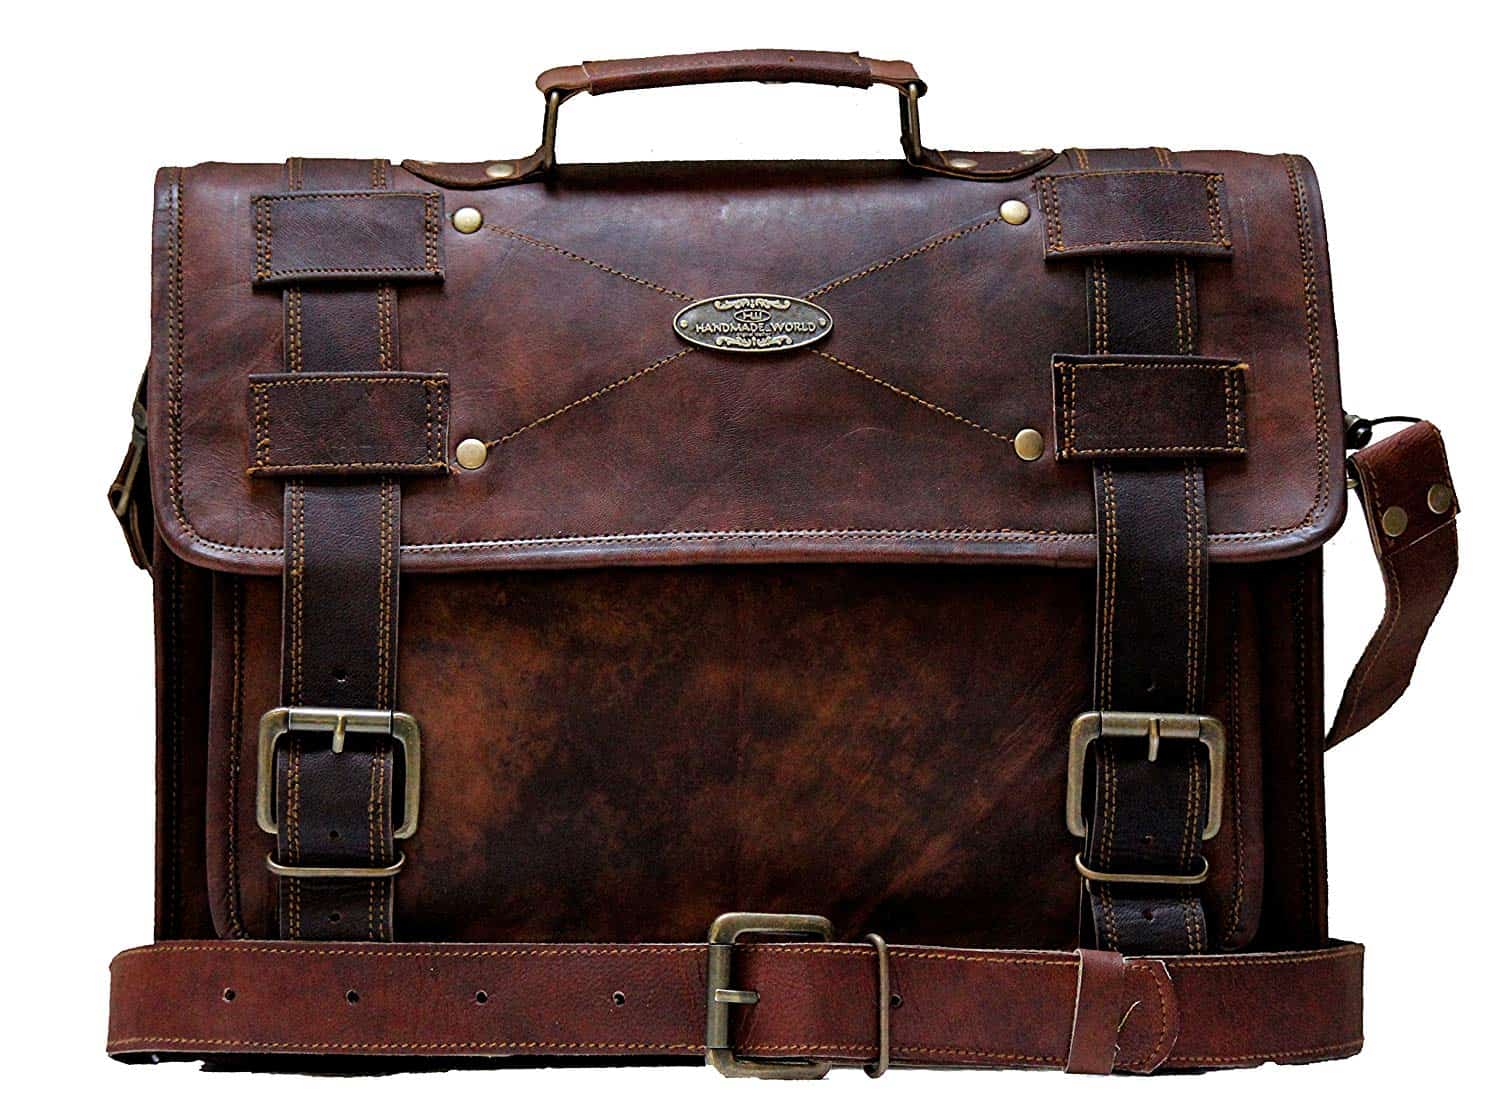 Improve Your Style with the Men’s Women’s Leather Laptop Computer Bag